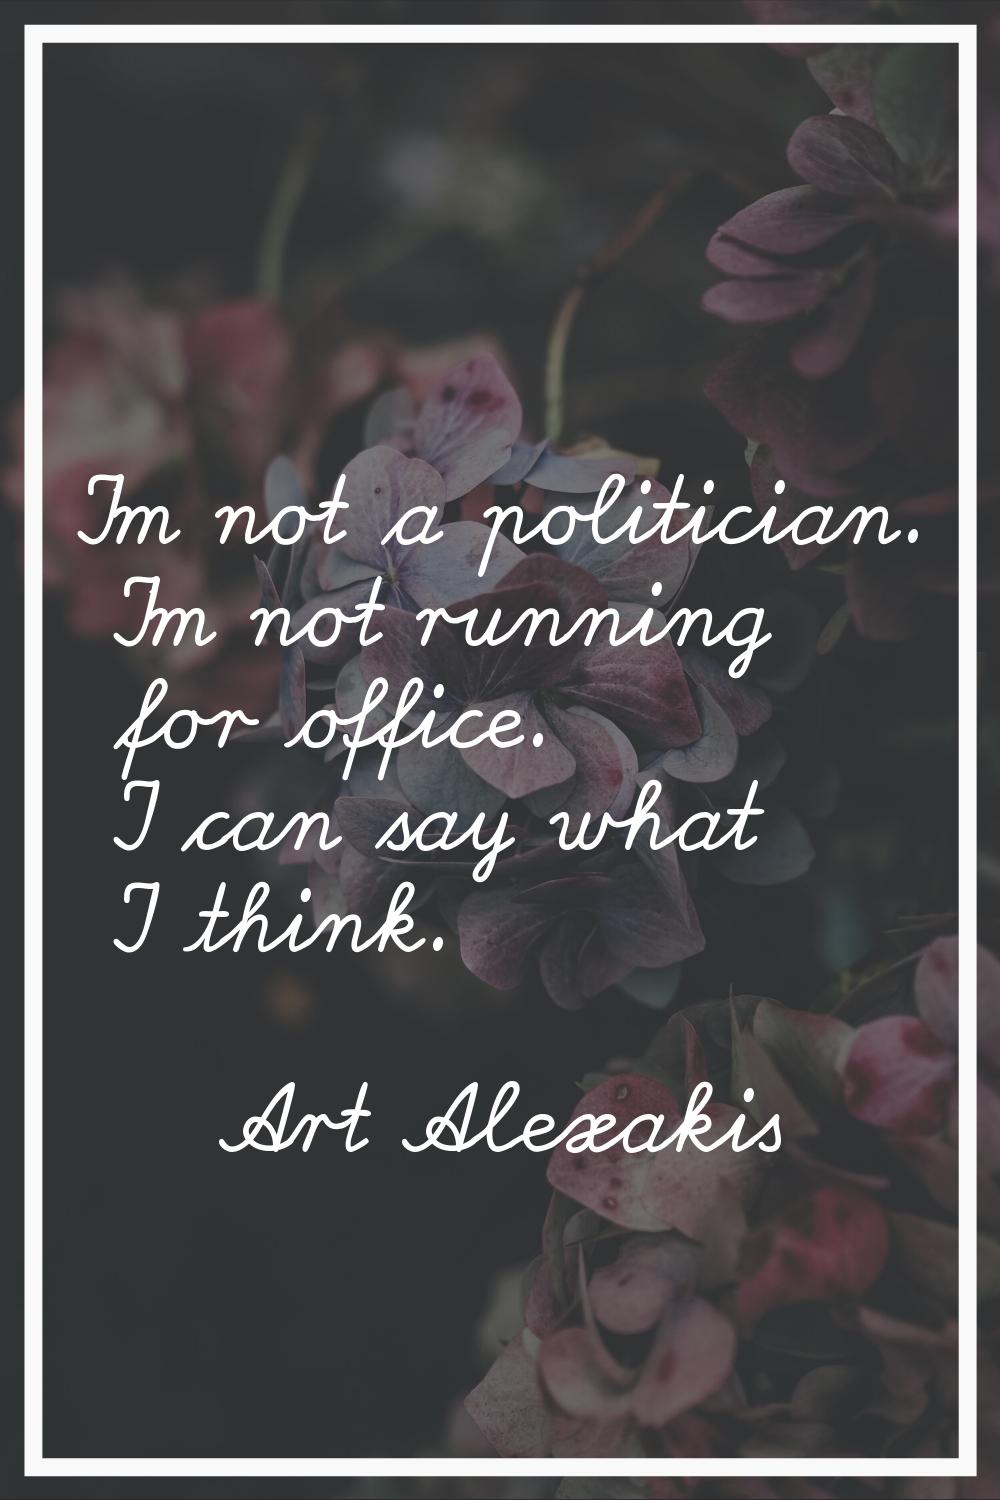 I'm not a politician. I'm not running for office. I can say what I think.